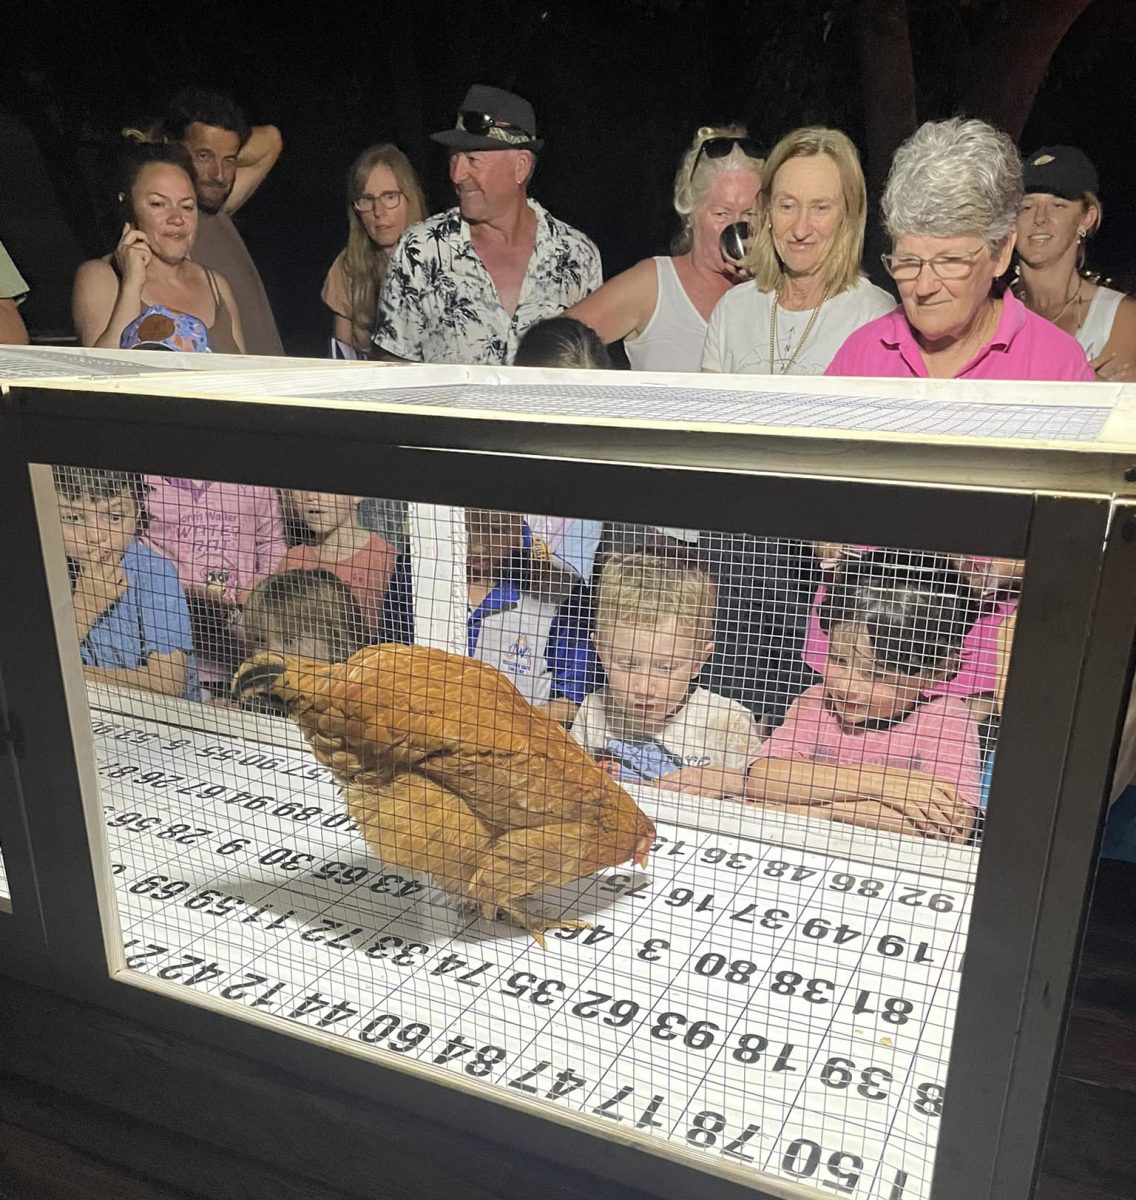 The Weipa Rodeo Association committee has been raising funds for Talk About It Tuedsay through Chicken Poop Bingo, but they'll ramp things up at the Albatross Bay Resort next week with a special charity night.